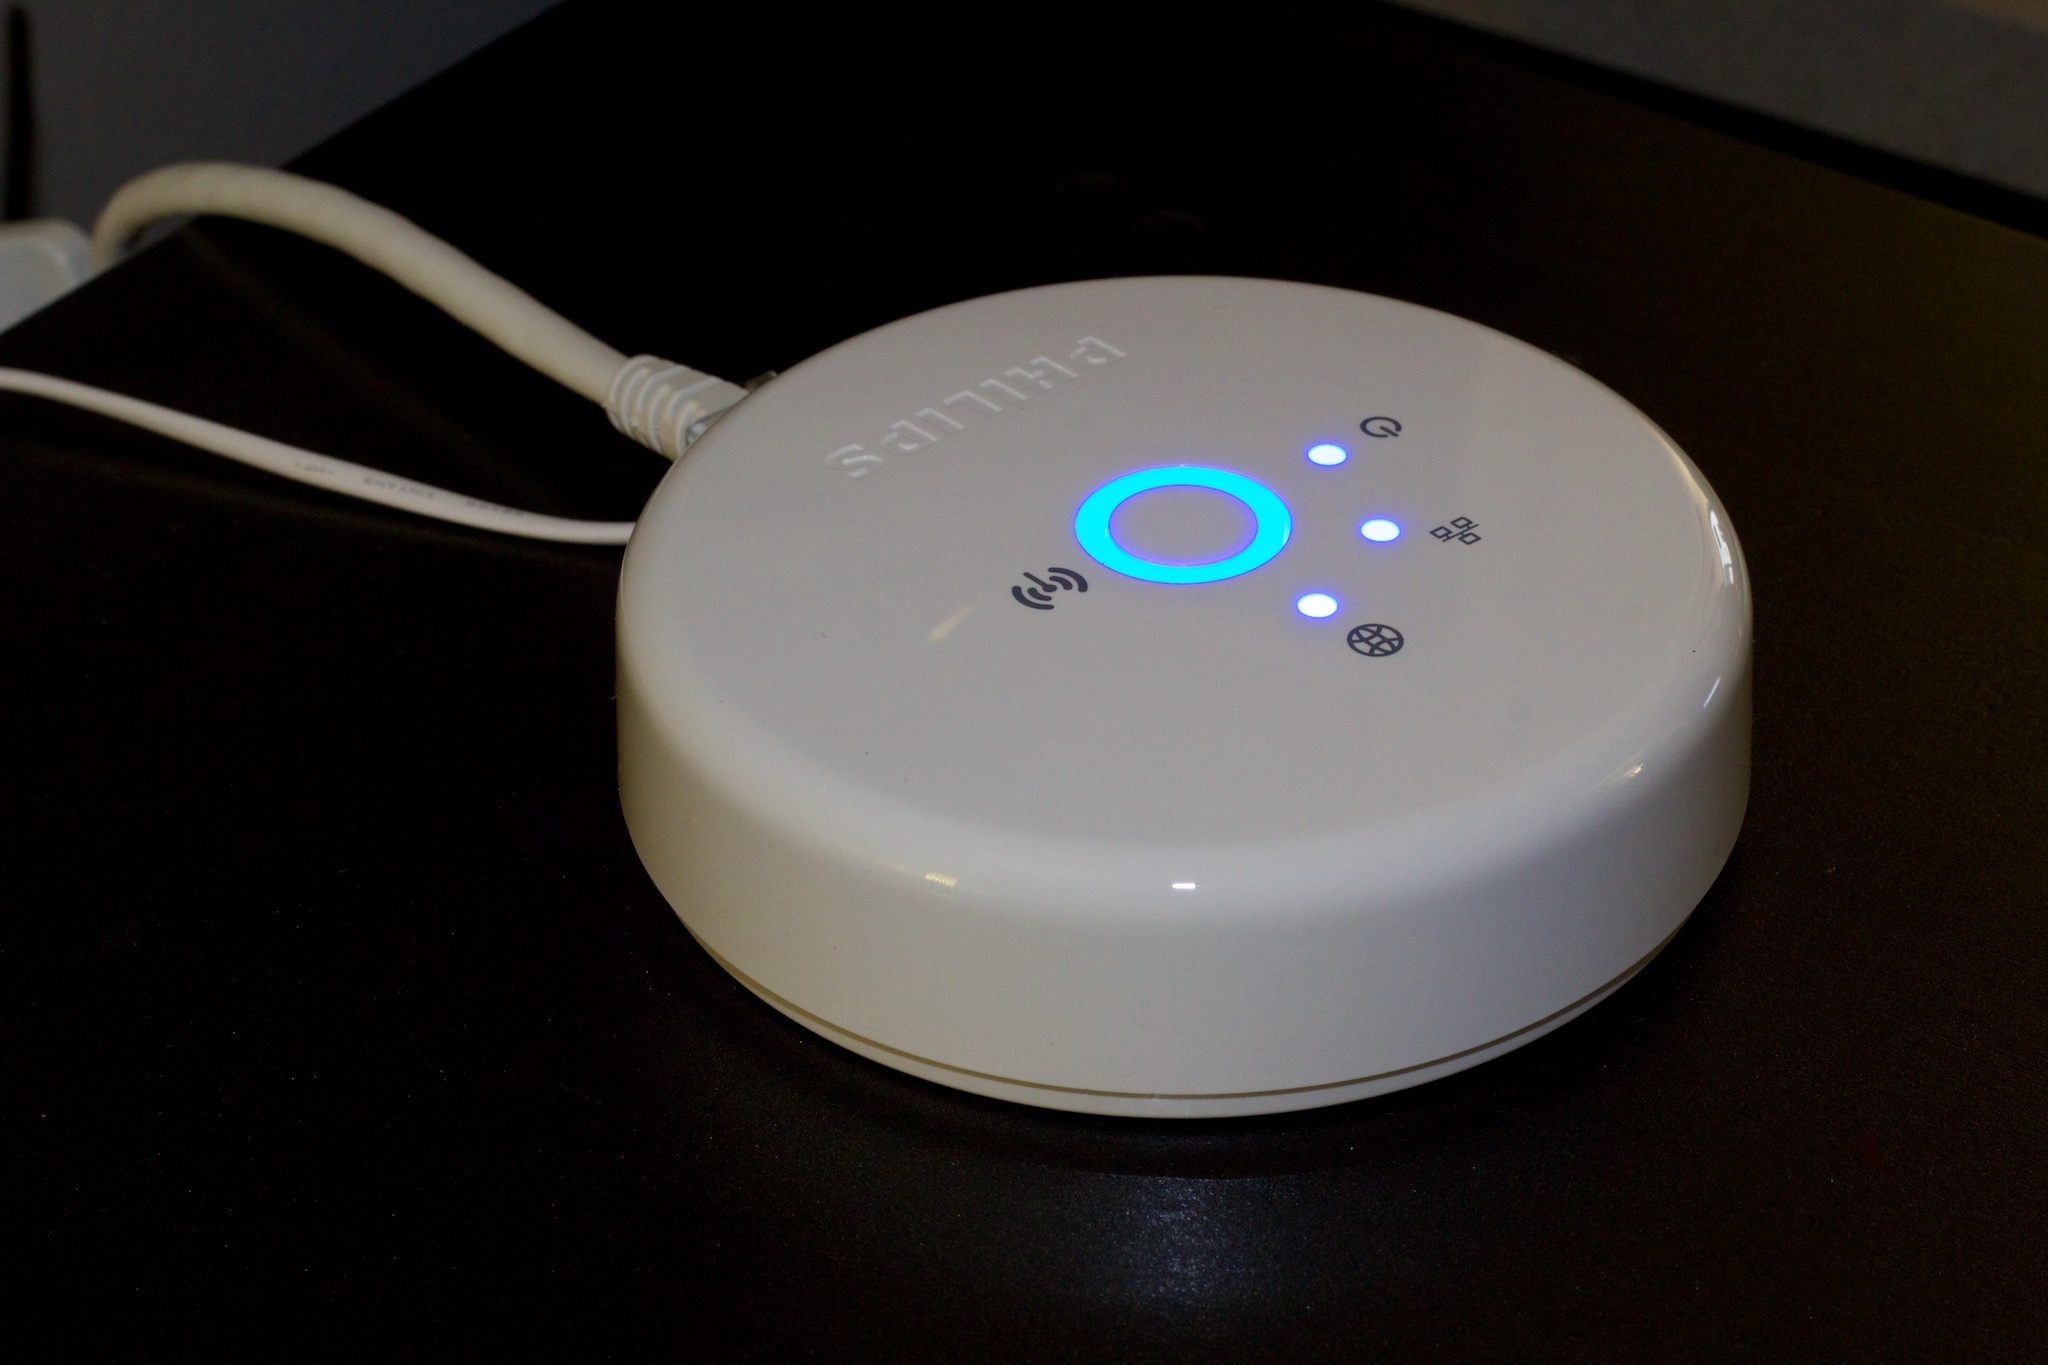 Mold Takke etage In living color: Ars reviews the hacker-approved Philips Hue LEDs | Ars  Technica